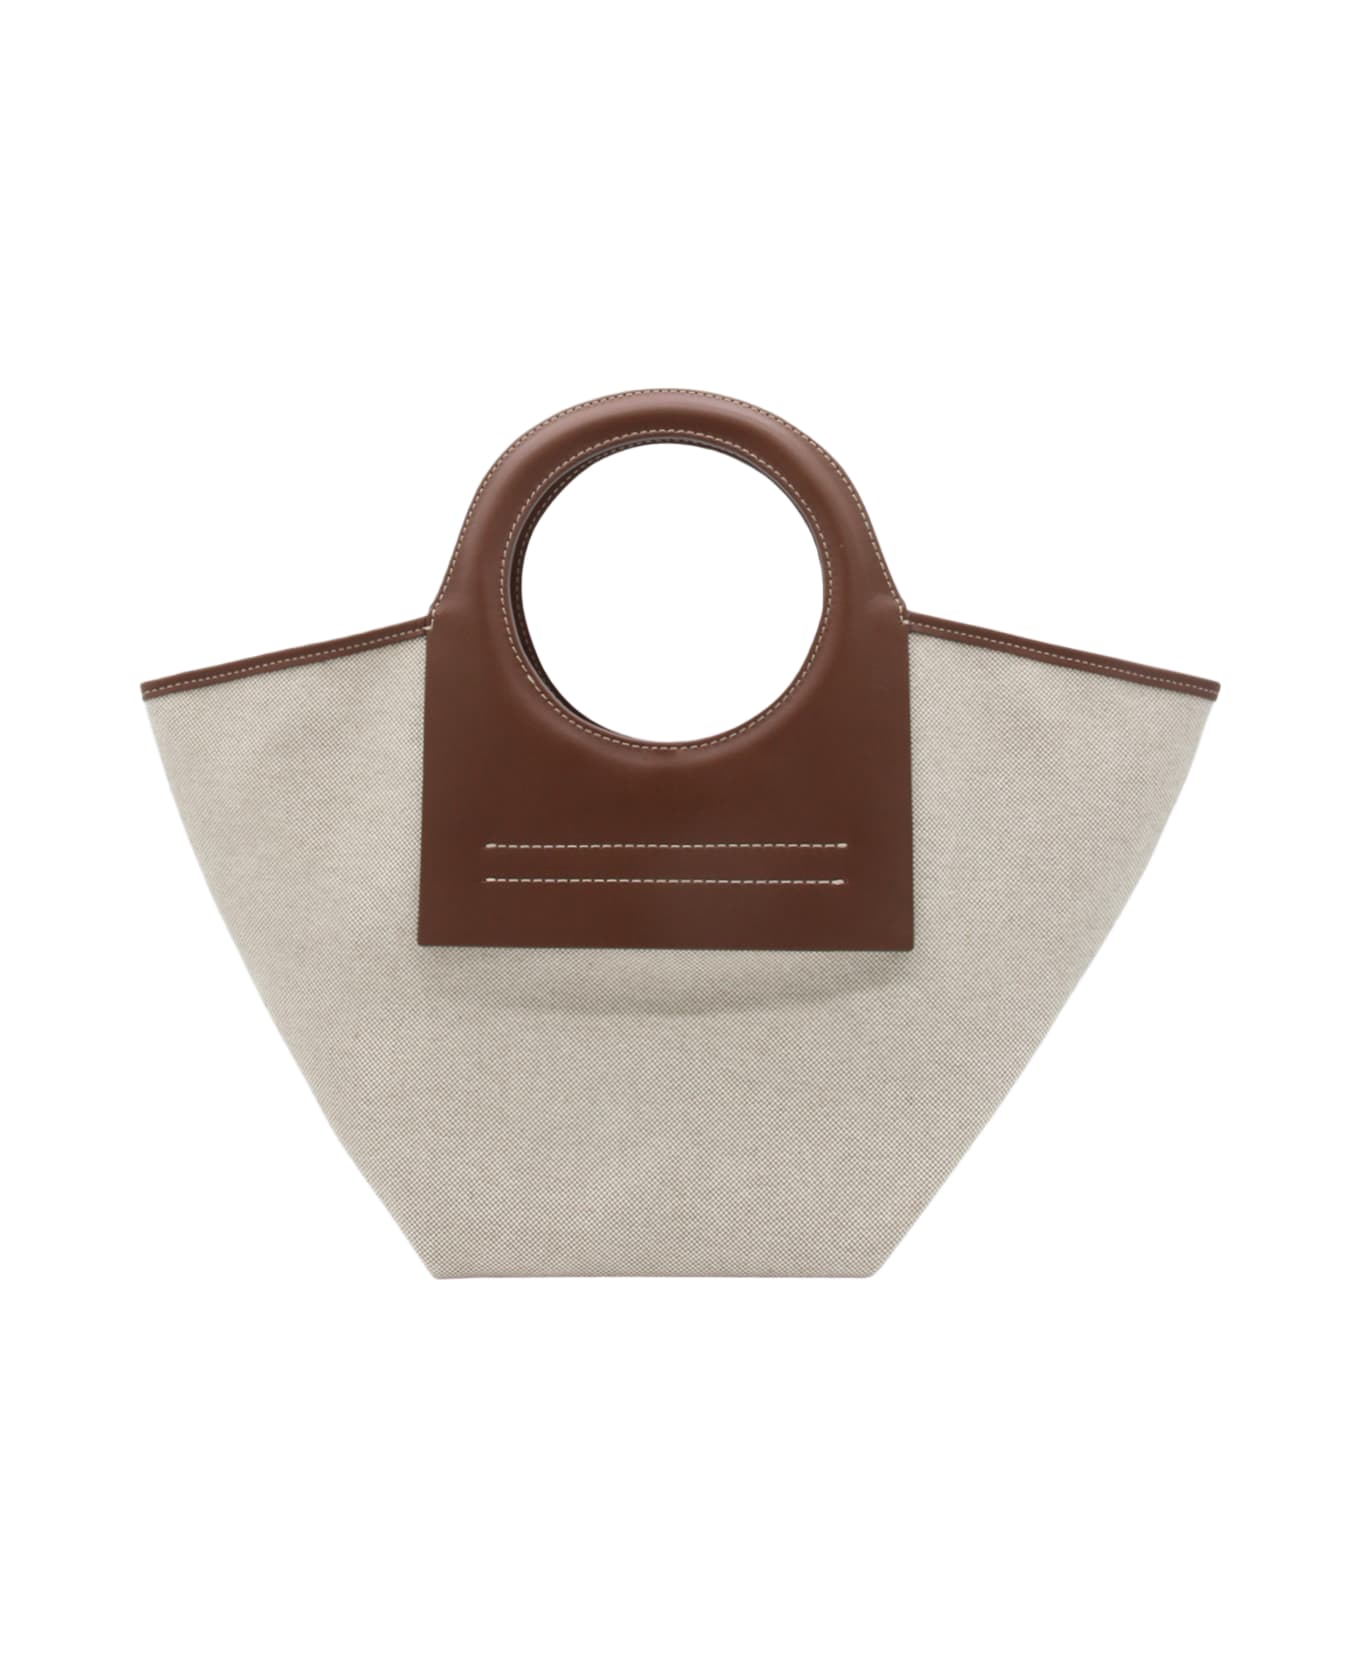 Hereu Beige And Brown Chestnut Leather And Canvas Cala Tote Bag - BEIGE/CHESTNUT トートバッグ